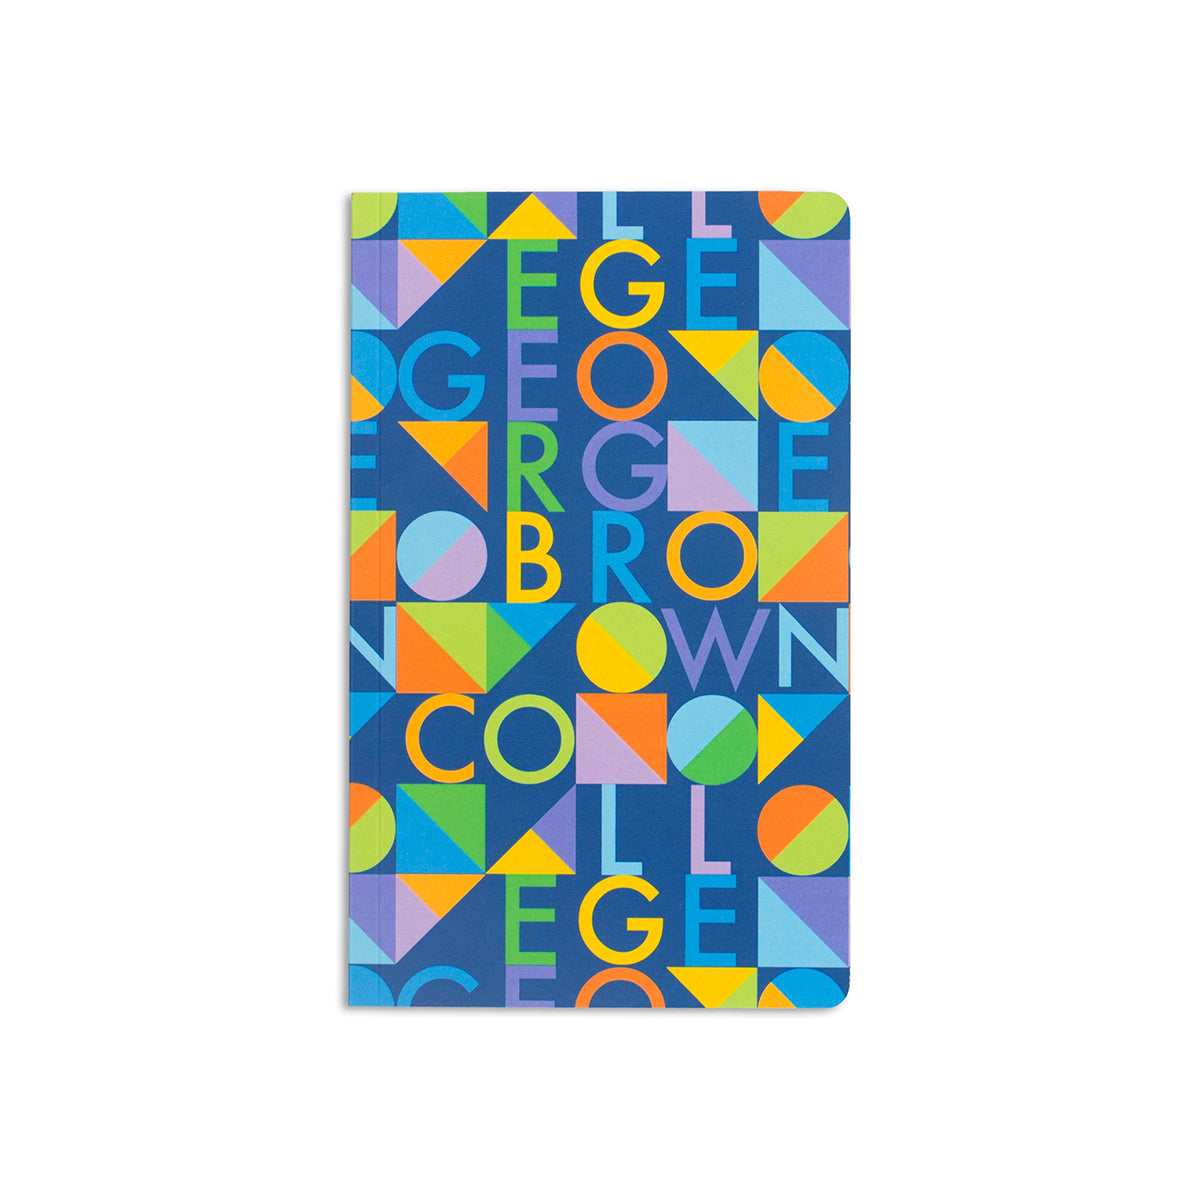 5" x 8.25" soft cover dark blue notebook with multicoloured george brown college text and geometric shape pattern 